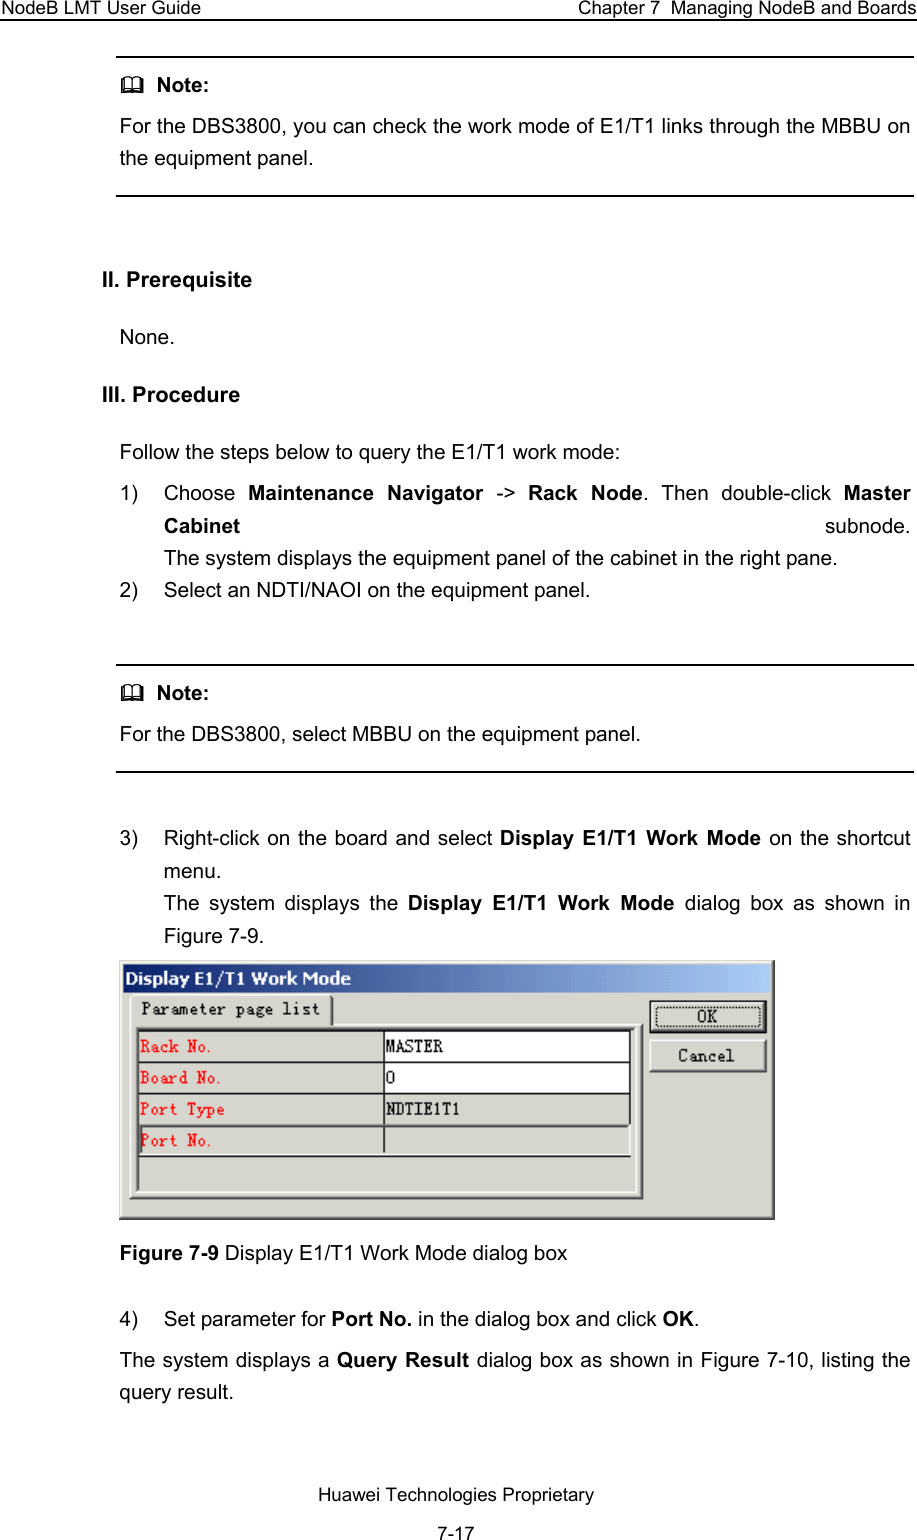 NodeB LMT User Guide  Chapter 7  Managing NodeB and Boards   Note:  For the DBS3800, you can check the work mode of E1/T1 links through the MBBU on the equipment panel.  II. Prerequisite None.  III. Procedure  Follow the steps below to query the E1/T1 work mode:  1) Choose Maintenance Navigator -&gt;  Rack Node. Then double-click Master Cabinet  subnode.  The system displays the equipment panel of the cabinet in the right pane.  2)  Select an NDTI/NAOI on the equipment panel.     Note:  For the DBS3800, select MBBU on the equipment panel.   3)  Right-click on the board and select Display E1/T1 Work Mode on the shortcut menu.  The system displays the Display E1/T1 Work Mode dialog box as shown in Figure 7-9.   Figure 7-9 Display E1/T1 Work Mode dialog box  4)  Set parameter for Port No. in the dialog box and click OK. The system displays a Query Result dialog box as shown in Figure 7-10, listing the query result.  Huawei Technologies Proprietary 7-17 